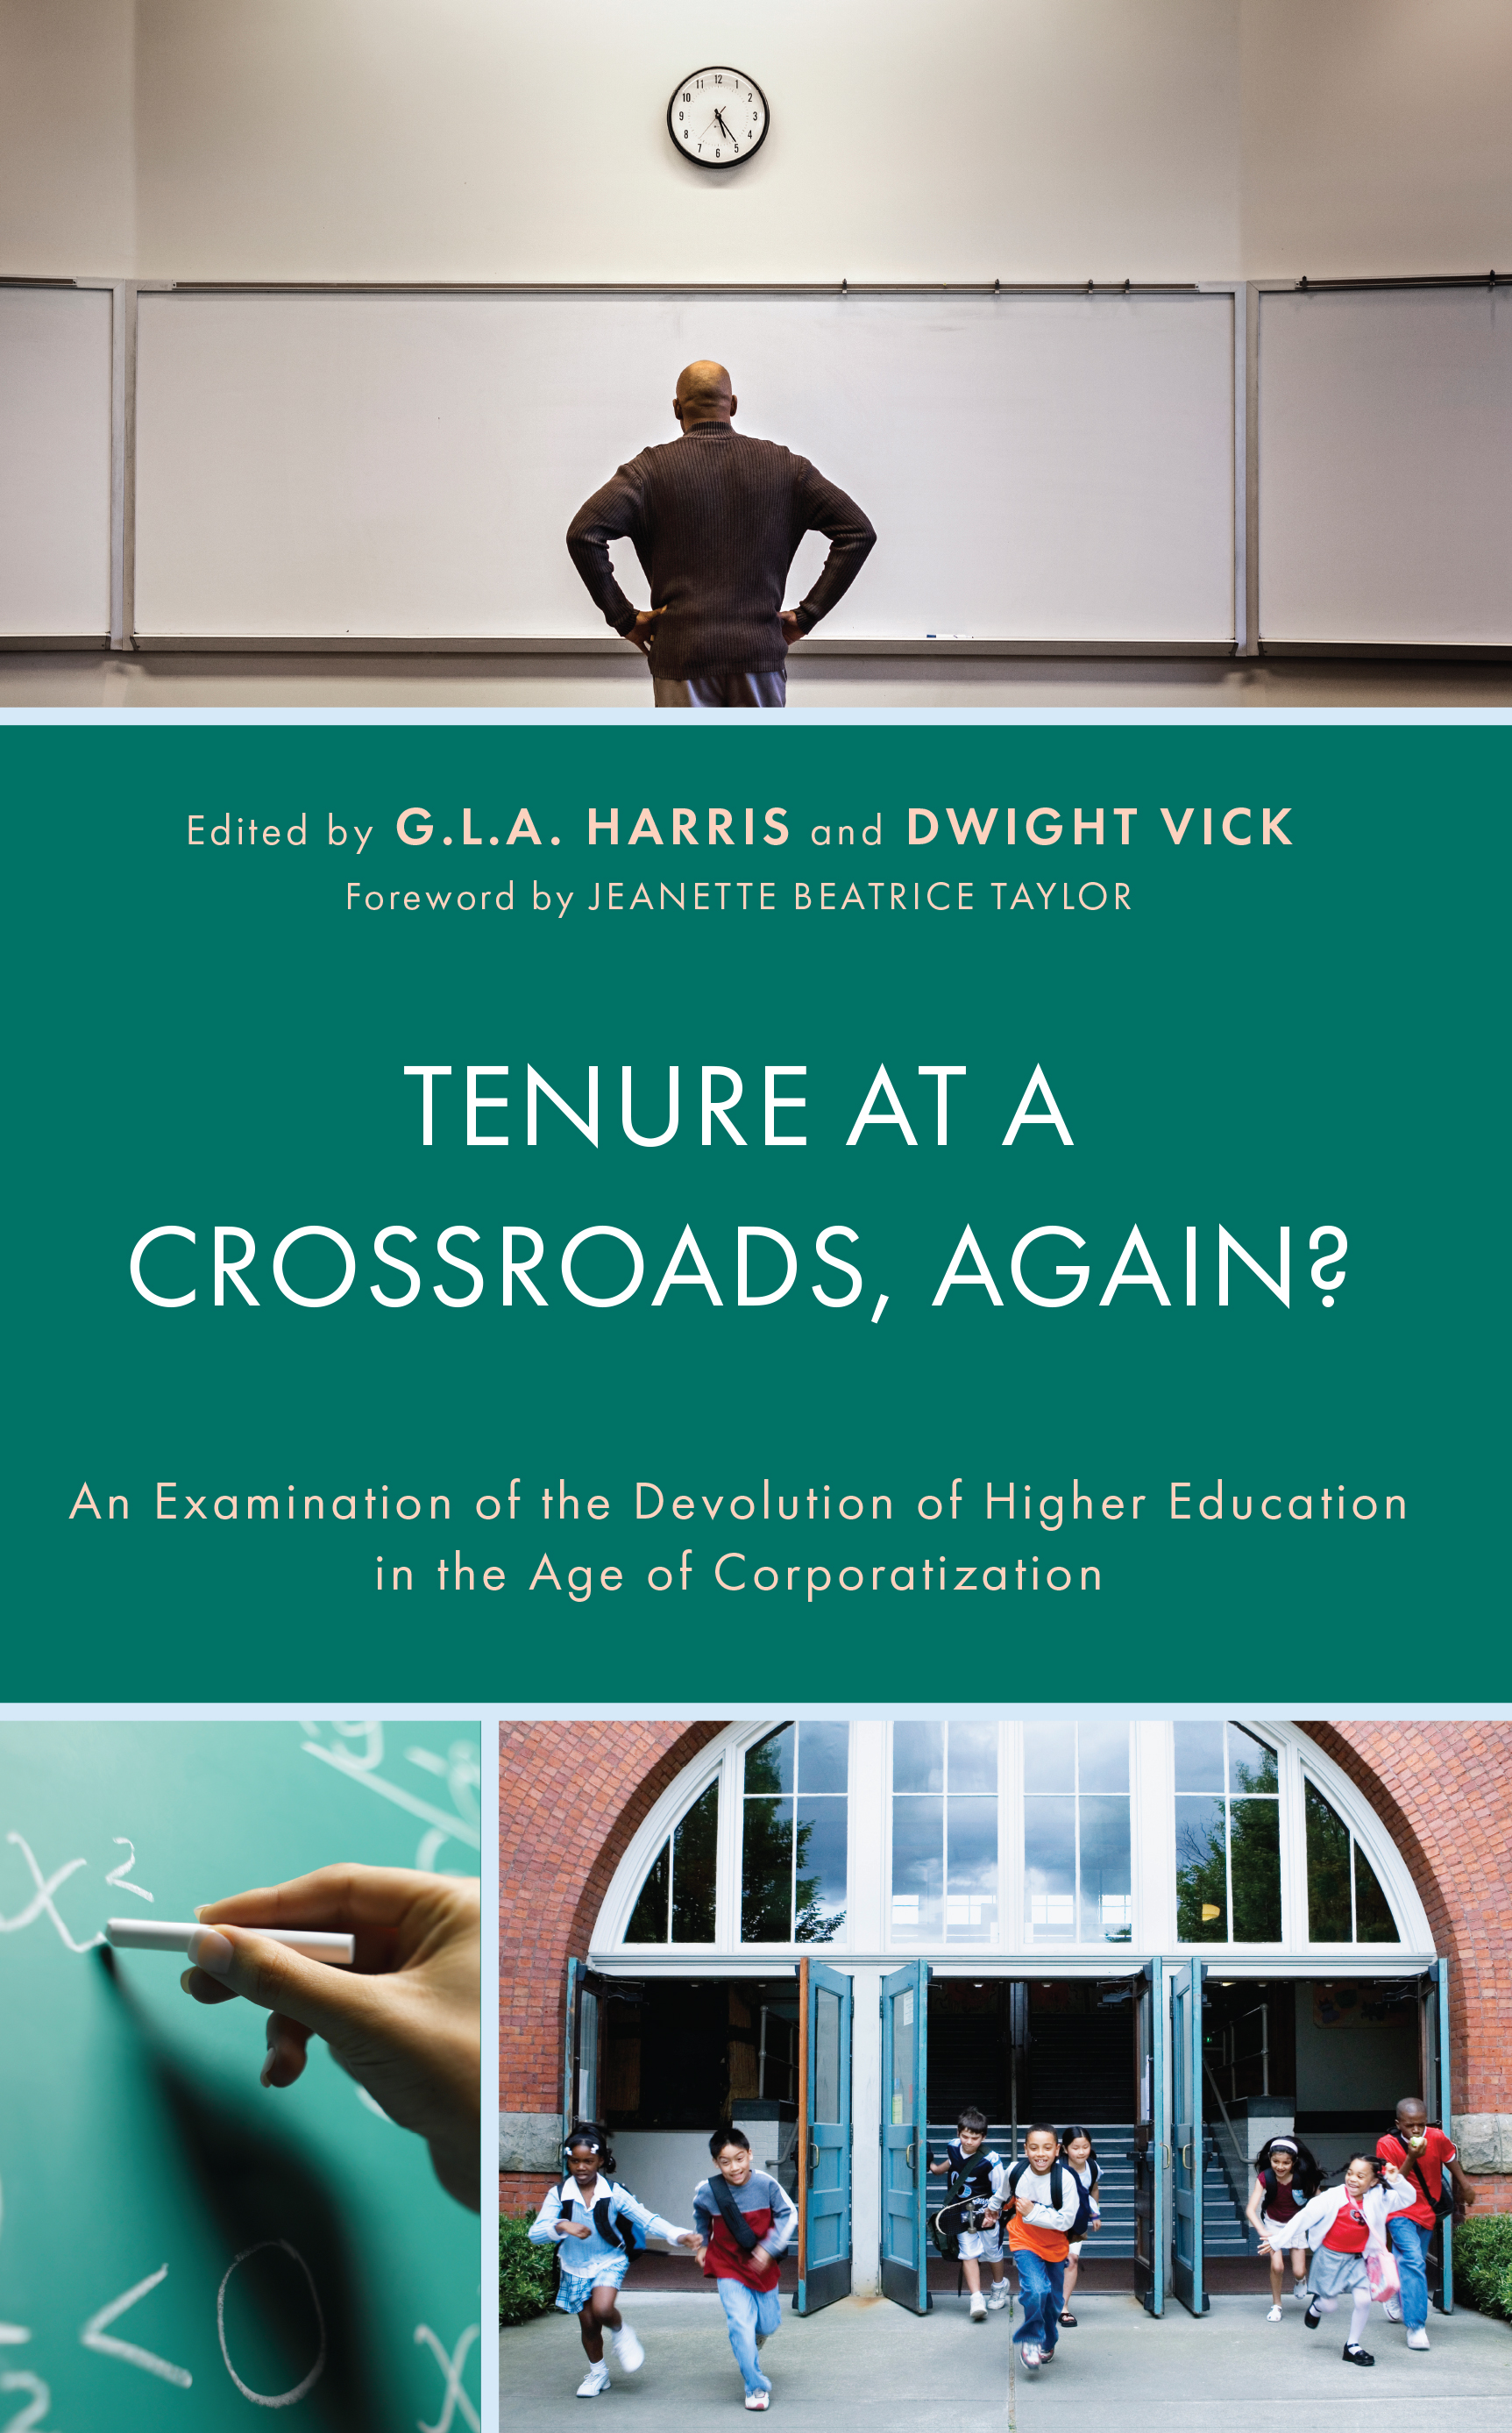 Tenure at a Crossroads, Again?: An Examination of the Devolution of Higher Education in the Age of Corporatization